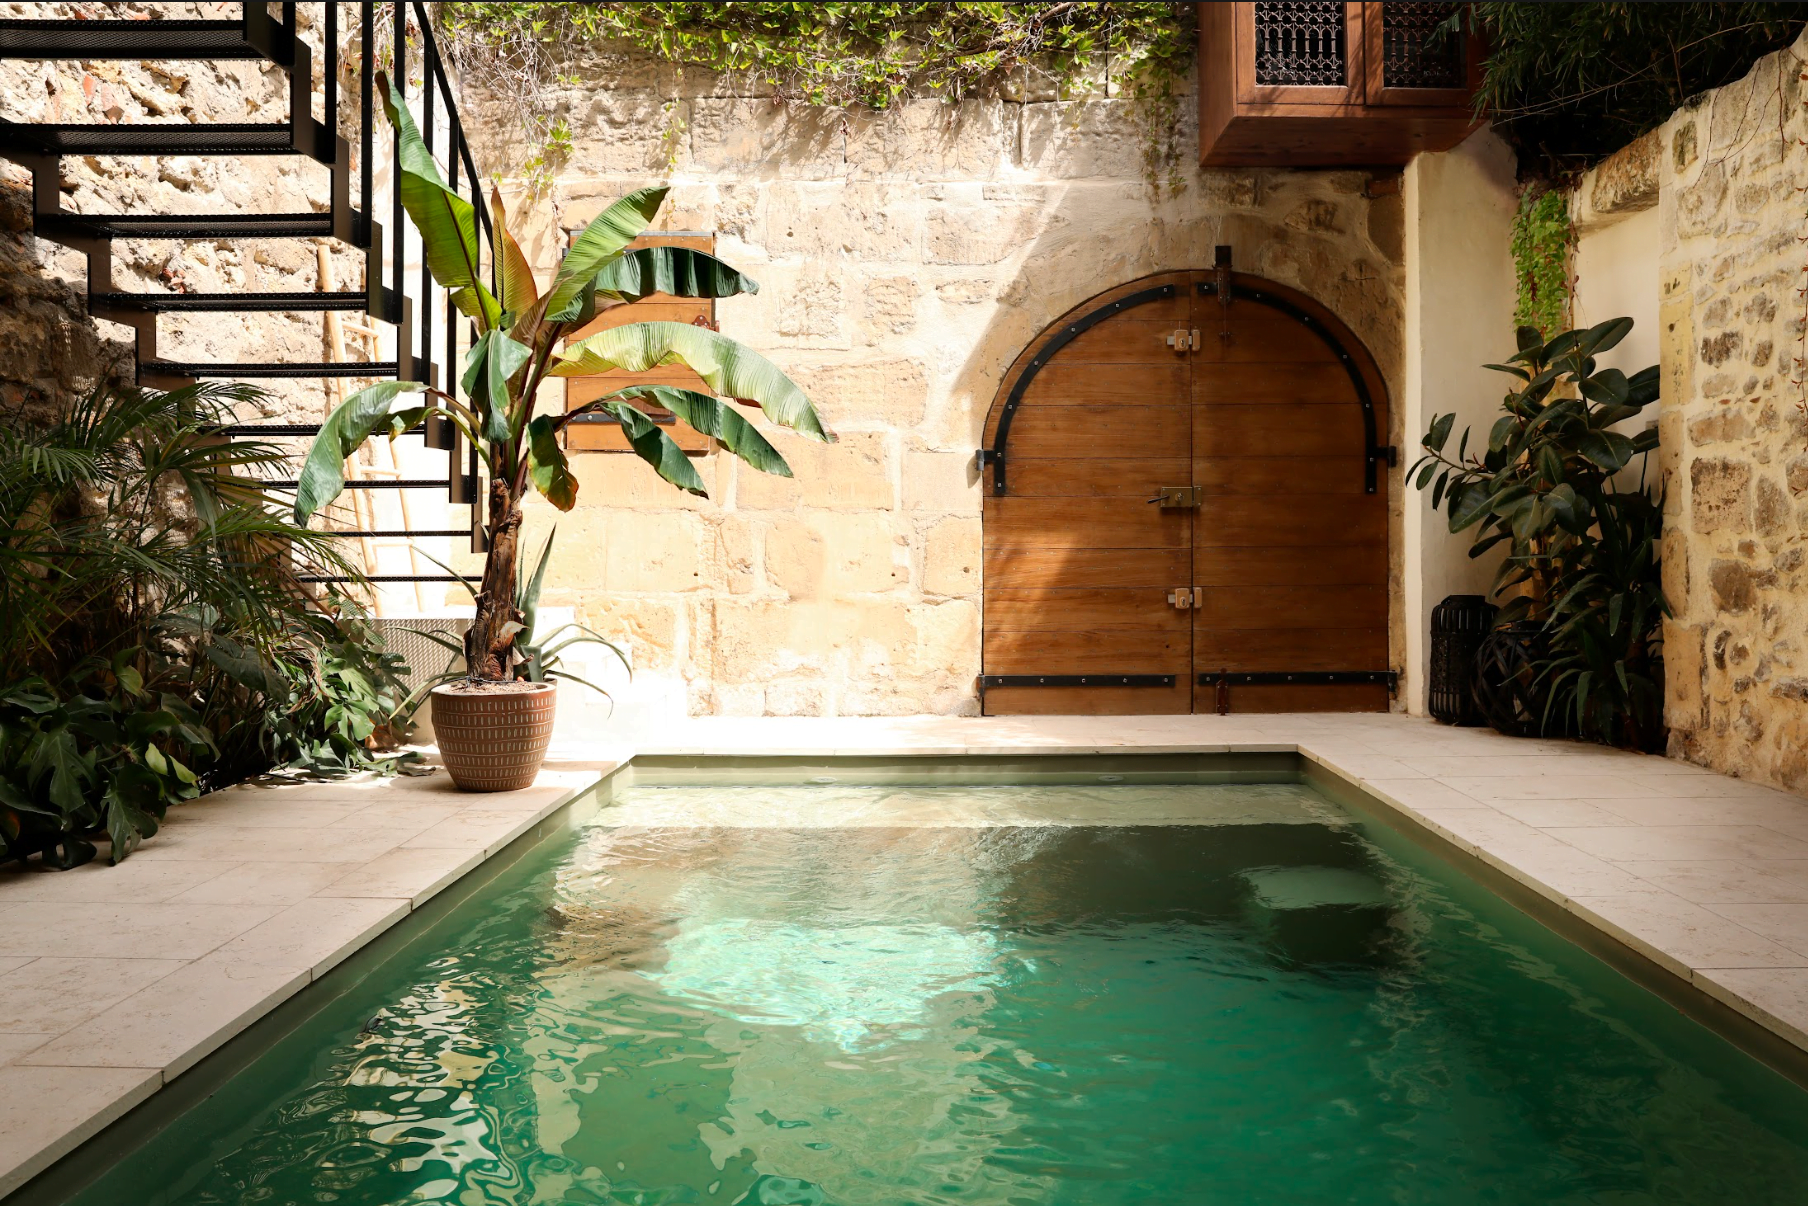 The Pool Suite in Arles, a pool house in the heart of the city